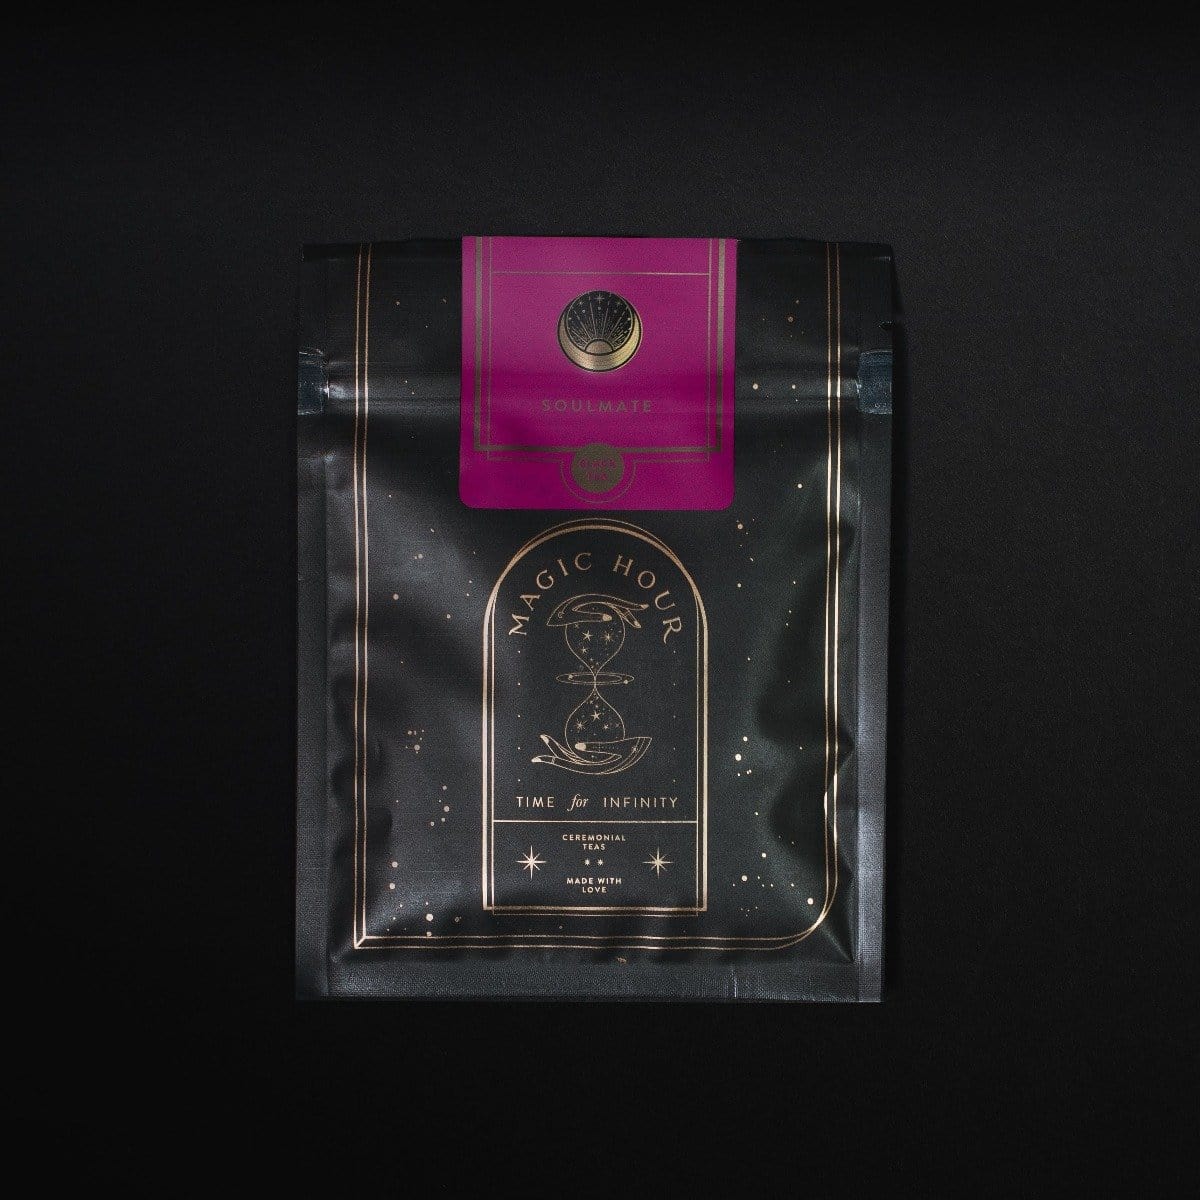 A black-colored Magic Hour Tea package is shown against a dark background. The bag has a decorative gold design with an hourglass illustration, and it reads &quot;Time for Infinity.&quot; A pink label with a circular emblem that says &quot;Soulmate: Chocolate-Raspberry-Rose Black Tea for Finding &amp; Celebrating Love&quot; is attached at the top, highlighting its organic loose leaf tea inside.